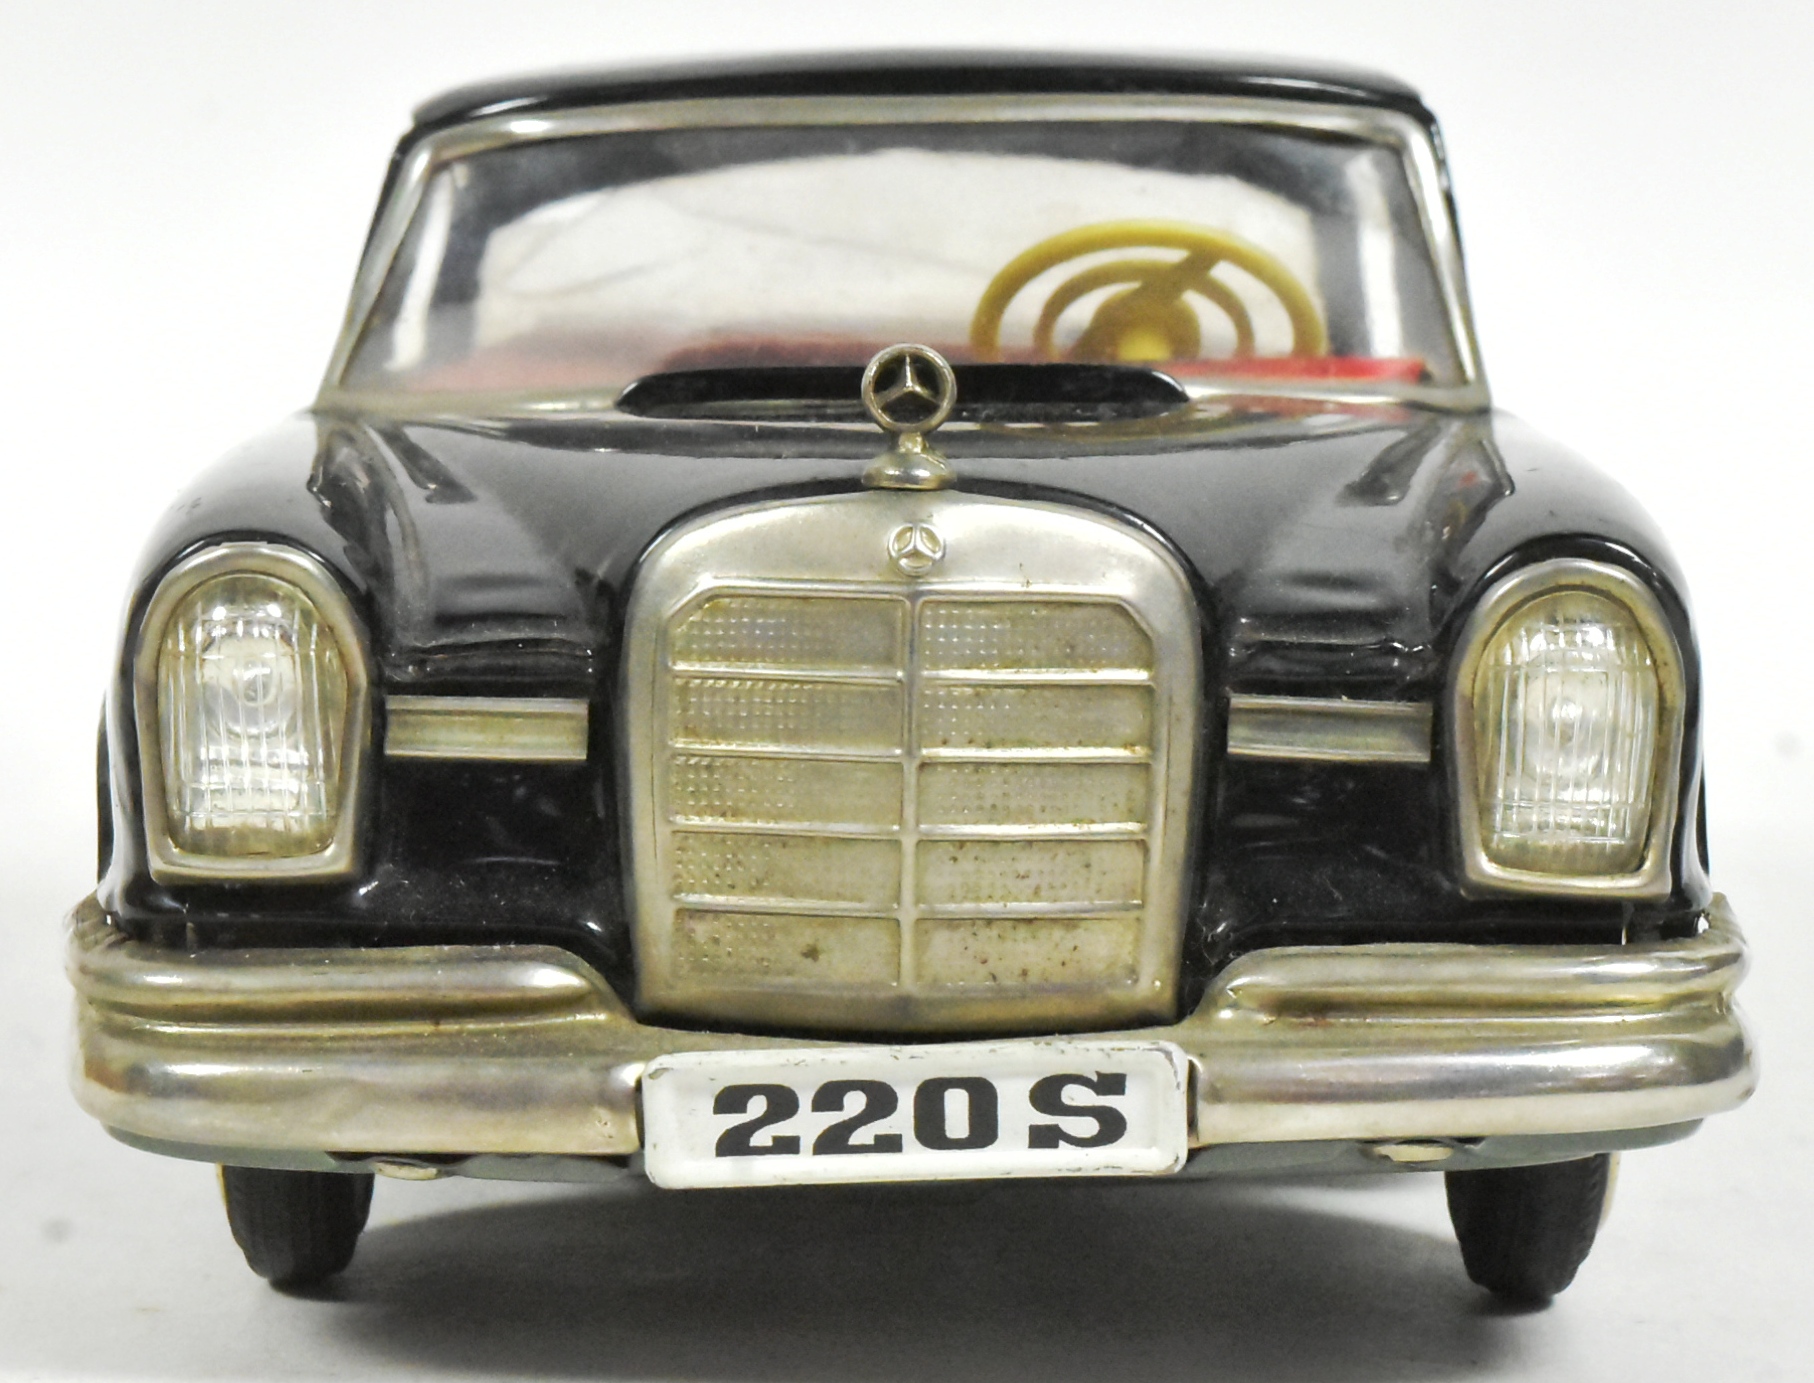 TINPLATE TOYS - JAPANESE TINPLATE MERCEDES BENZ 220S - Image 5 of 6